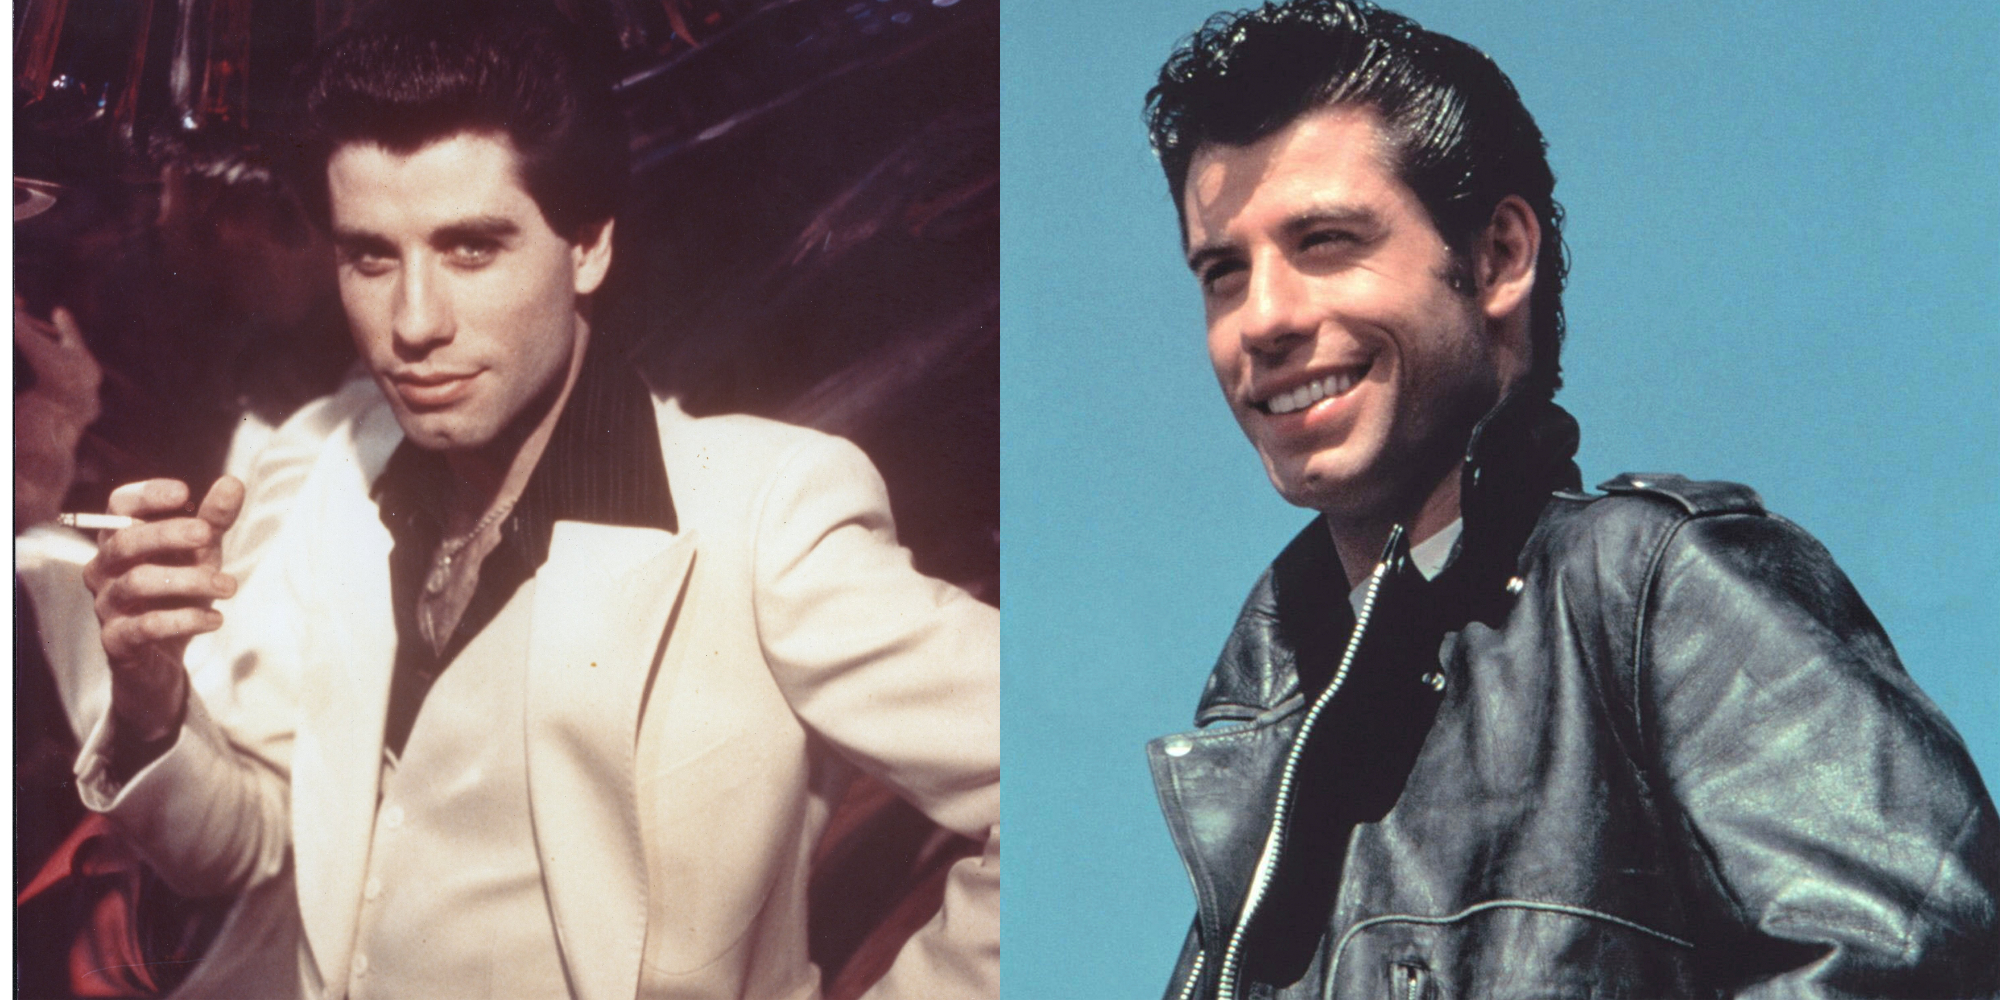 John Travolta: One Heartbreaking Loss Permeated Two of His Most Iconic Movie Moments